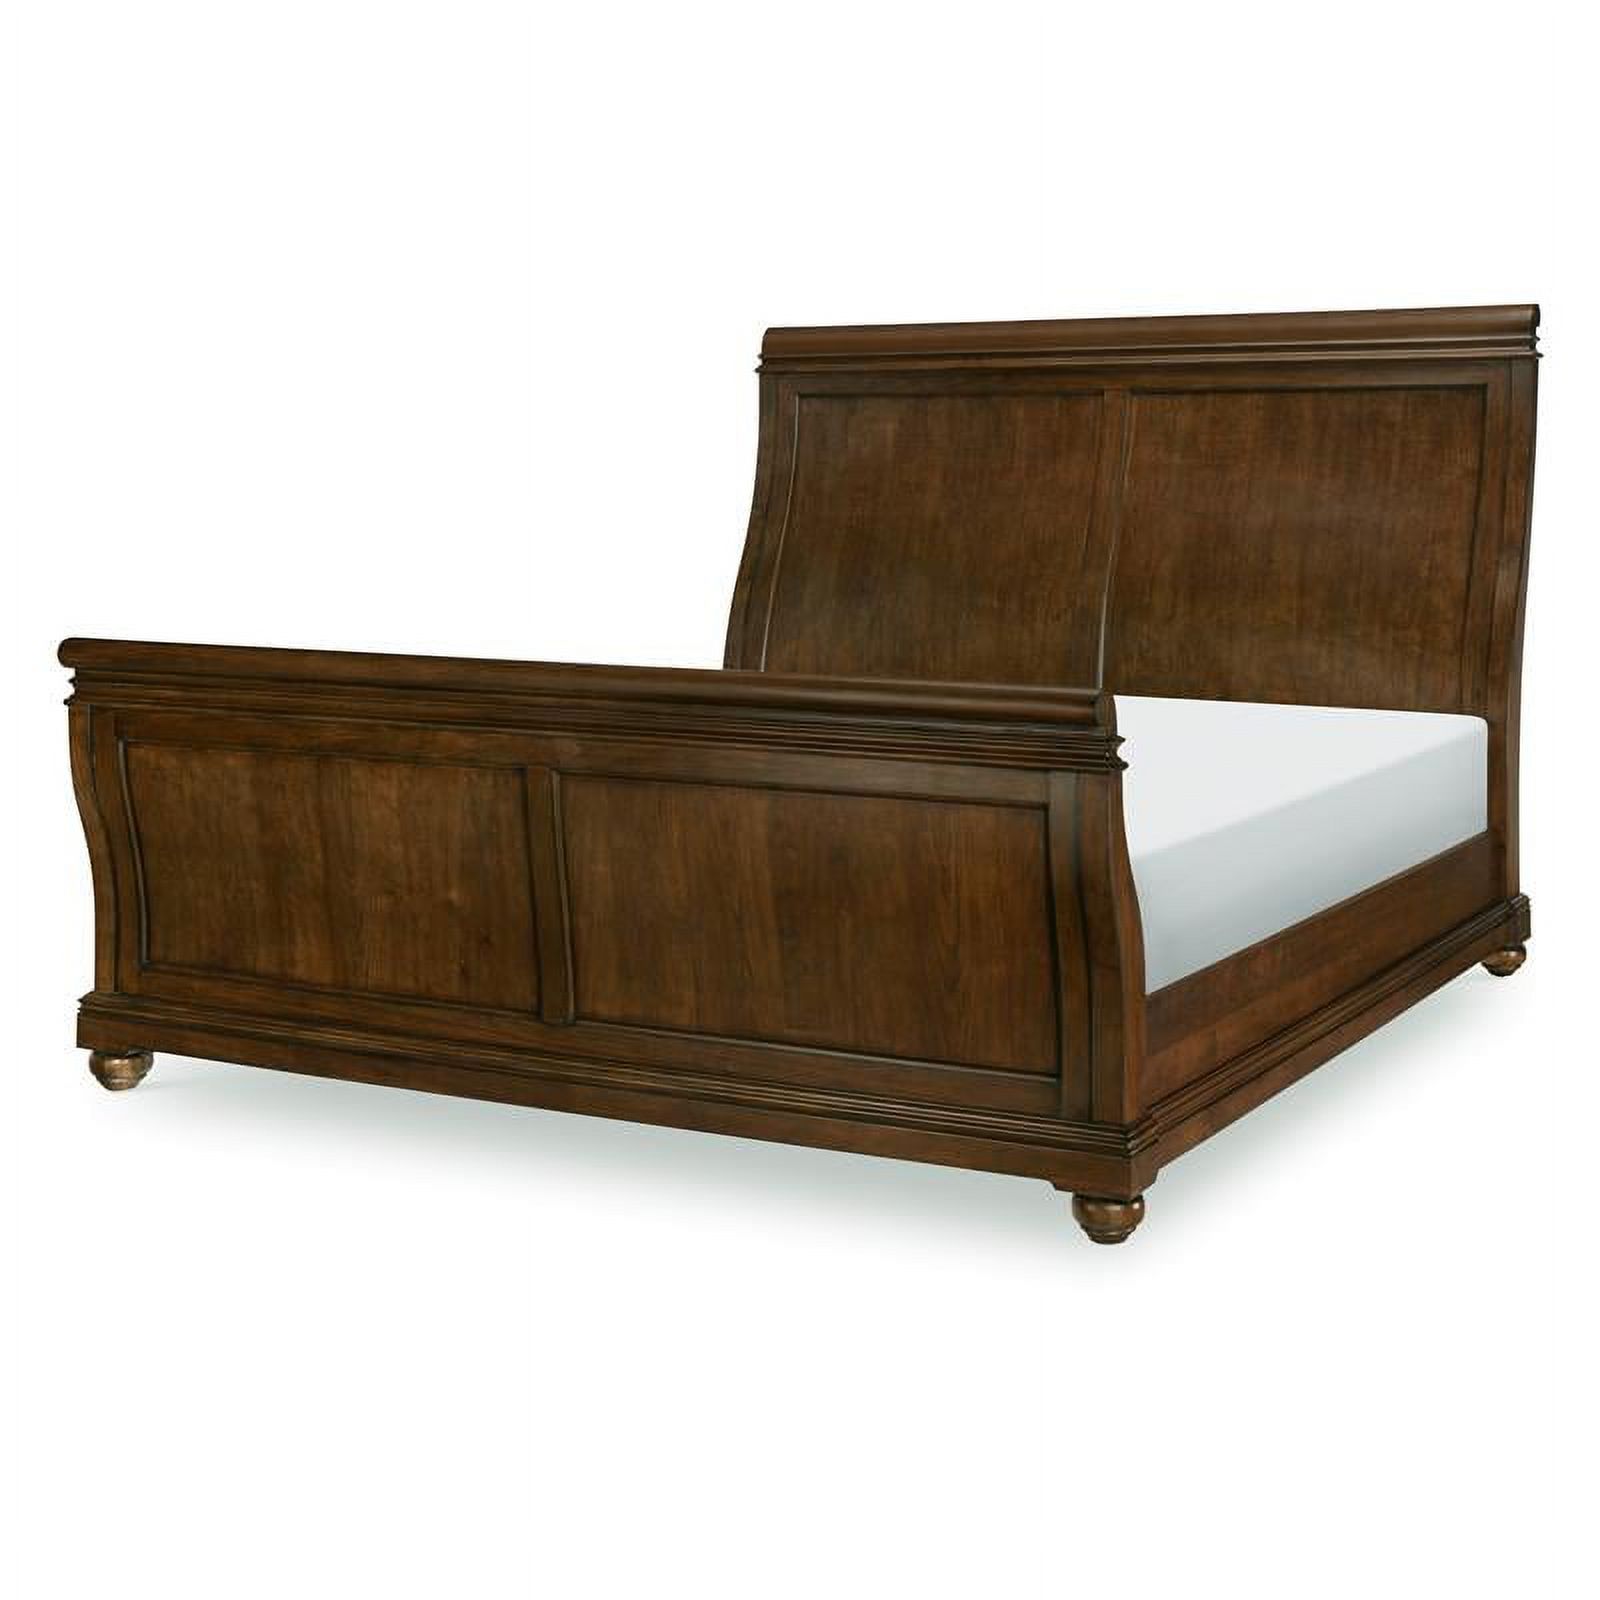 Coventry Queen Sleigh Headboard in Classic Cherry Finish Wood - image 1 of 2